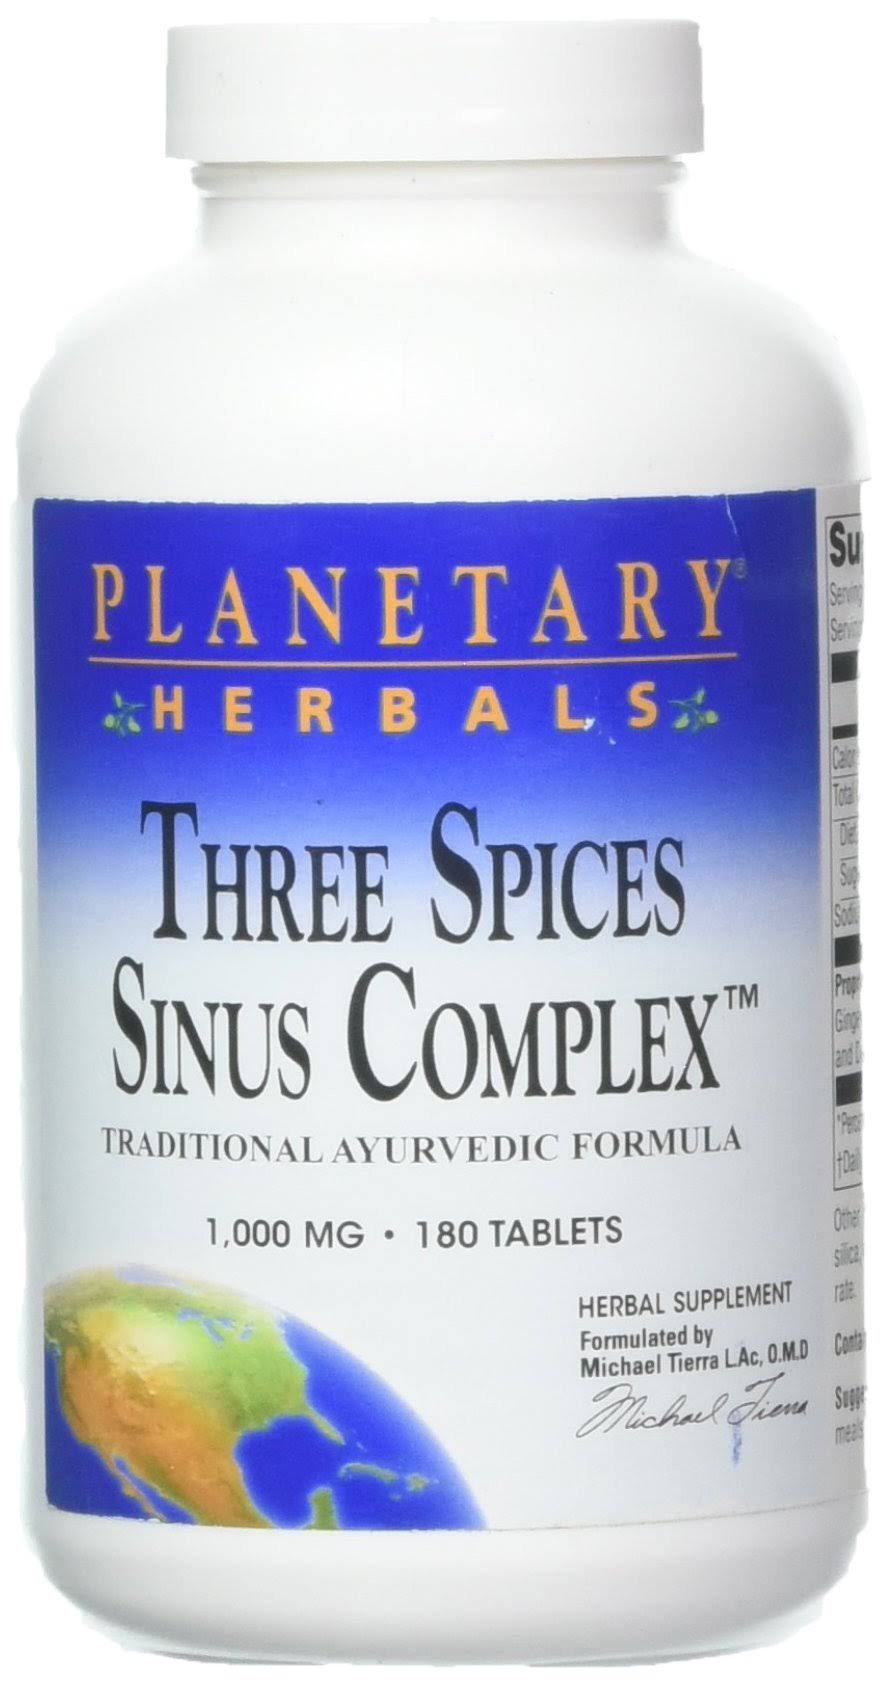 Planetary Herbals Three Spices Sinus Complex Herbal Supplement - 1000mg, 180ct